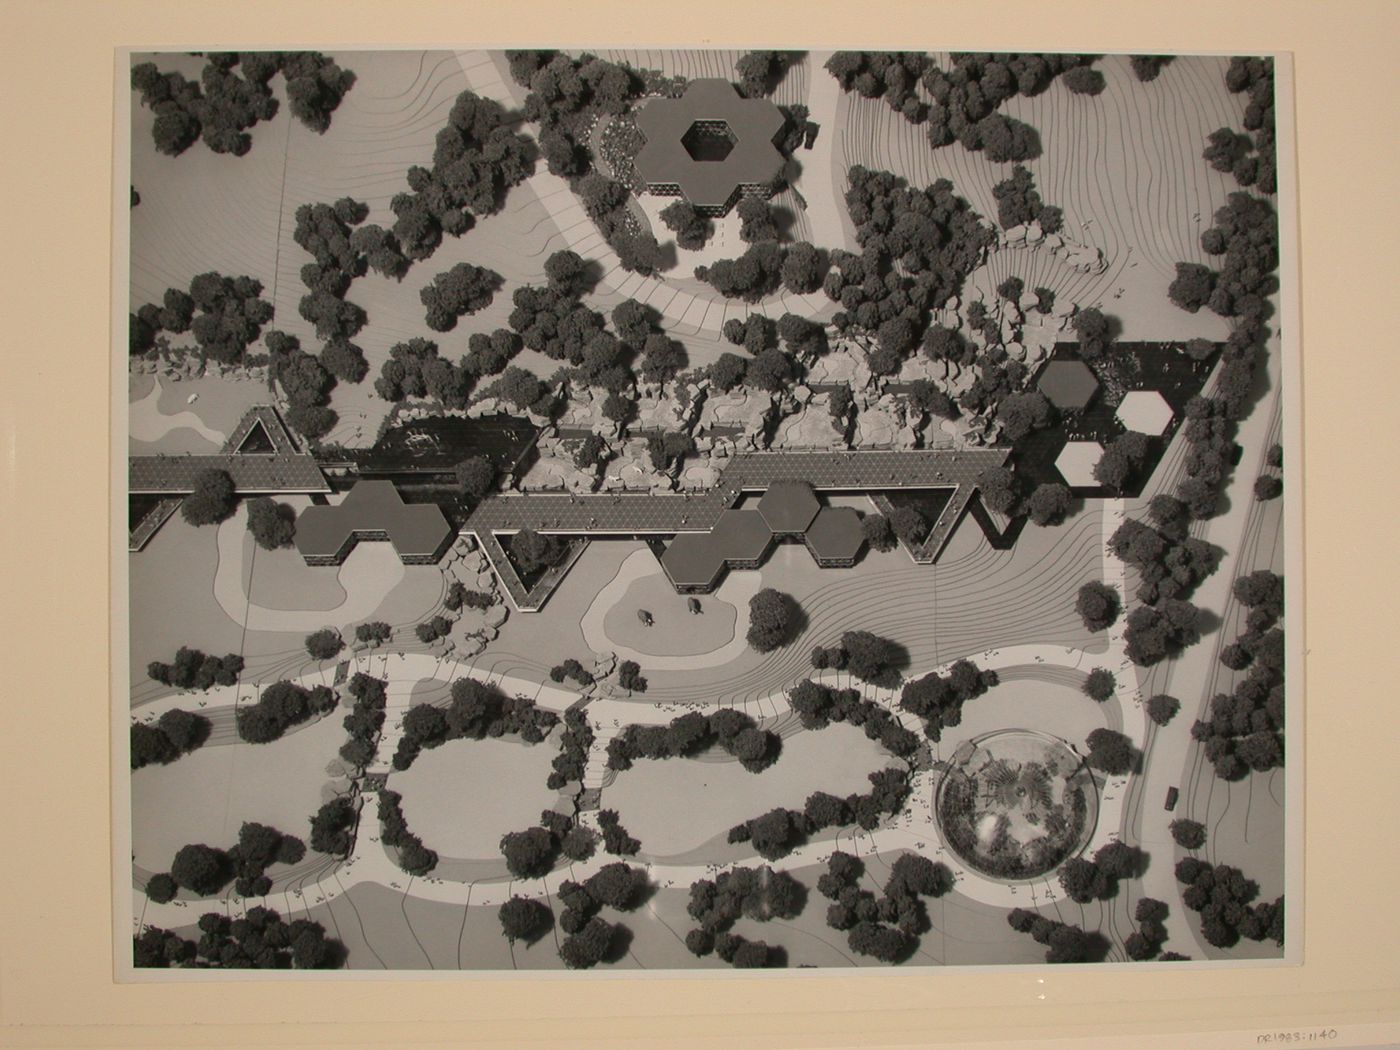 Photograph of a model for the Omaha Zoo showing the Prototype Hexagonal Buildings and the Aviary Structure, Omaha, Nebraska